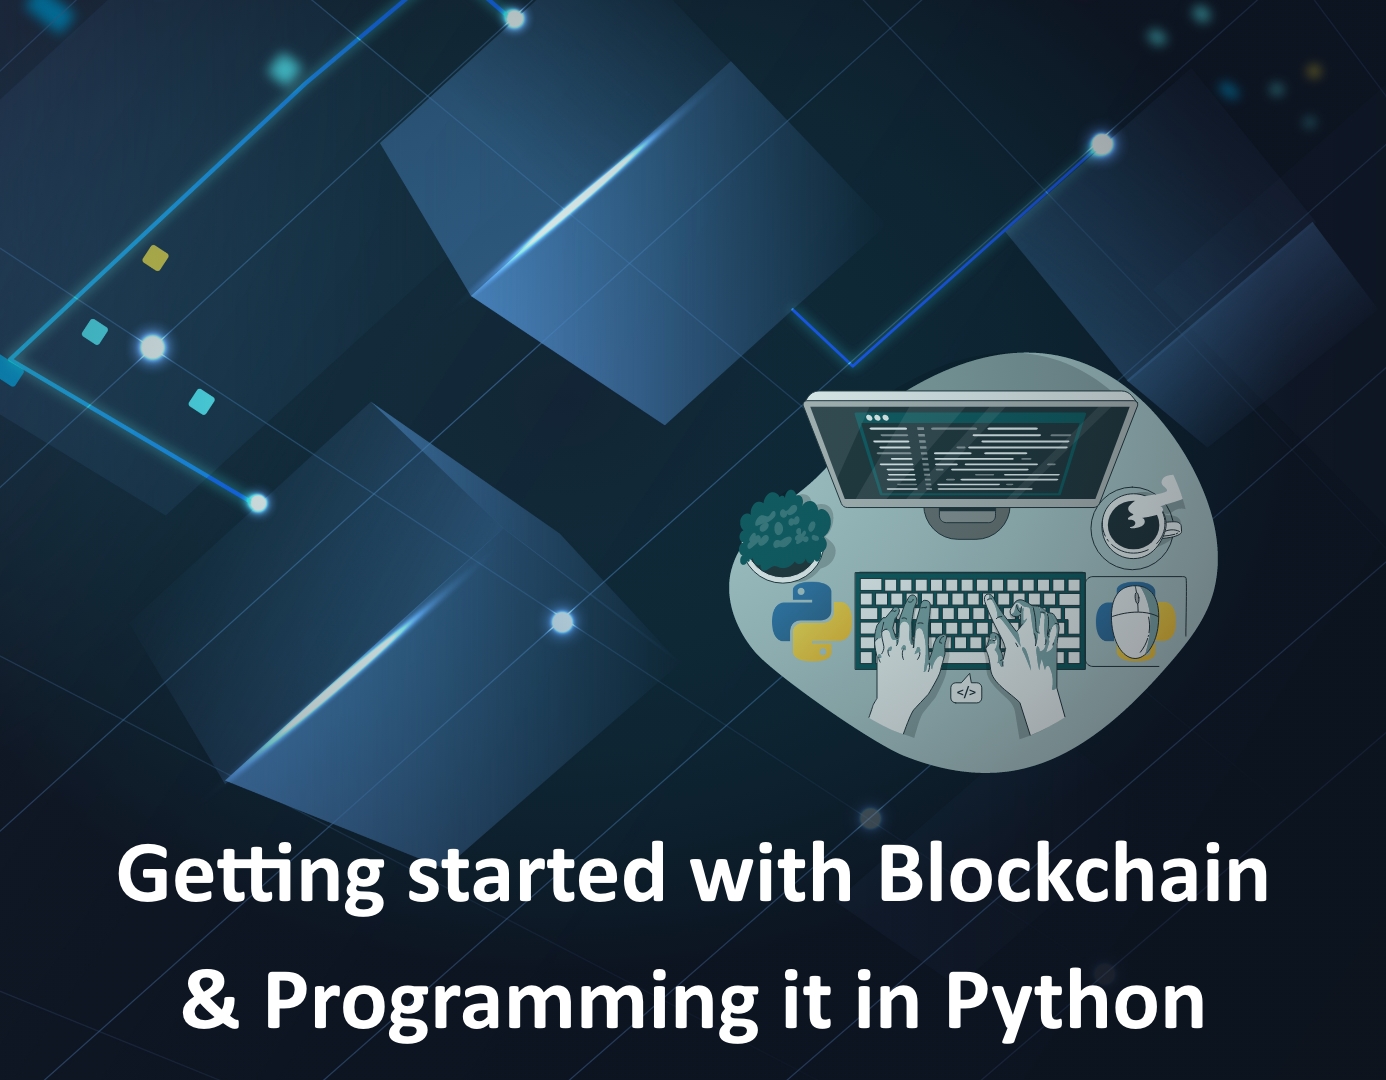 Getting started with Blockchain and programming it in Python